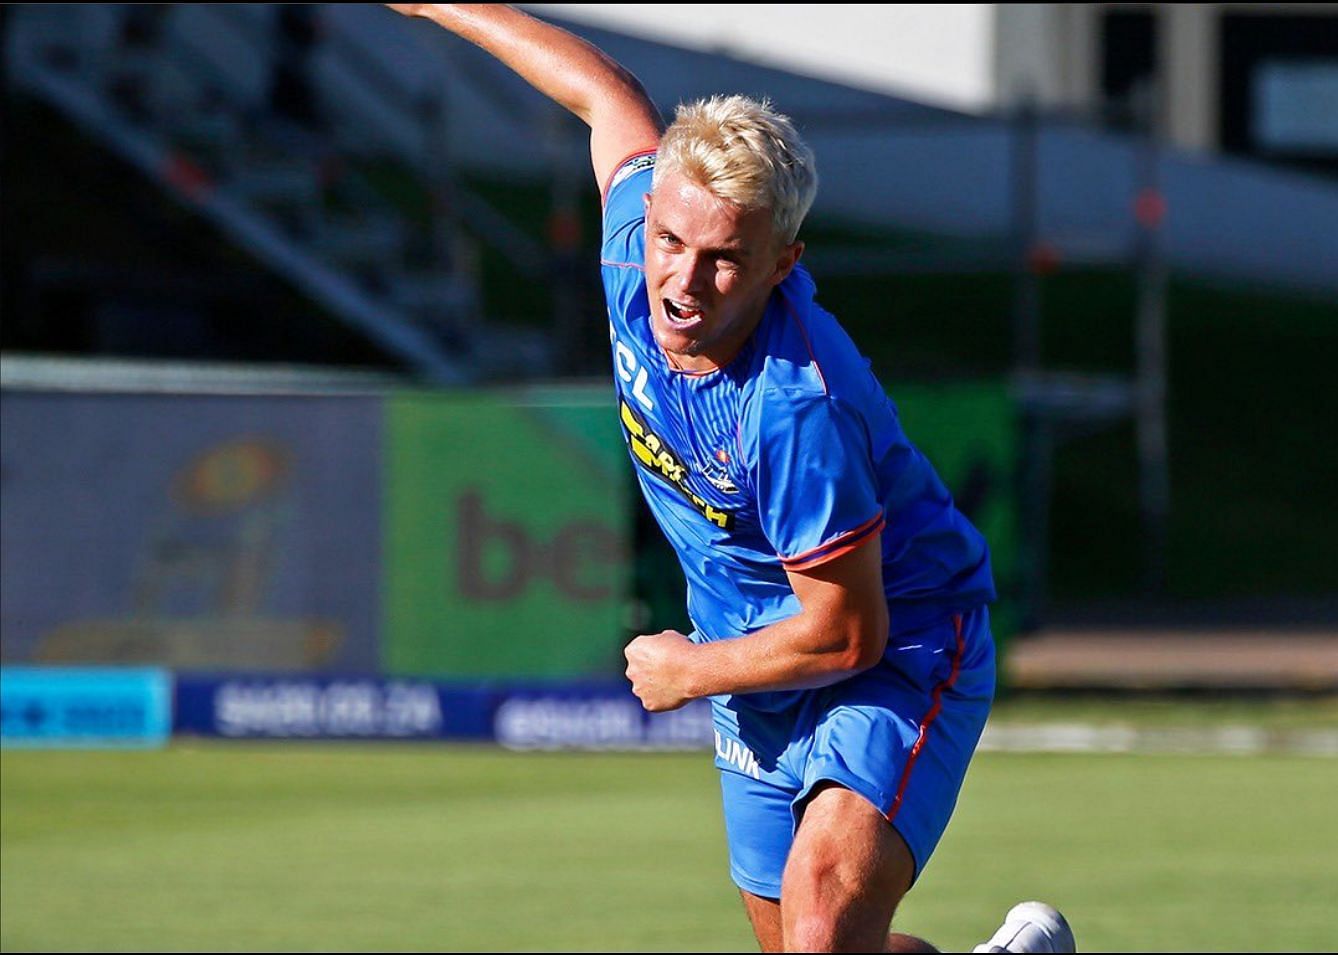 Sam Curran during net session (Credits: X / MICapeTown)